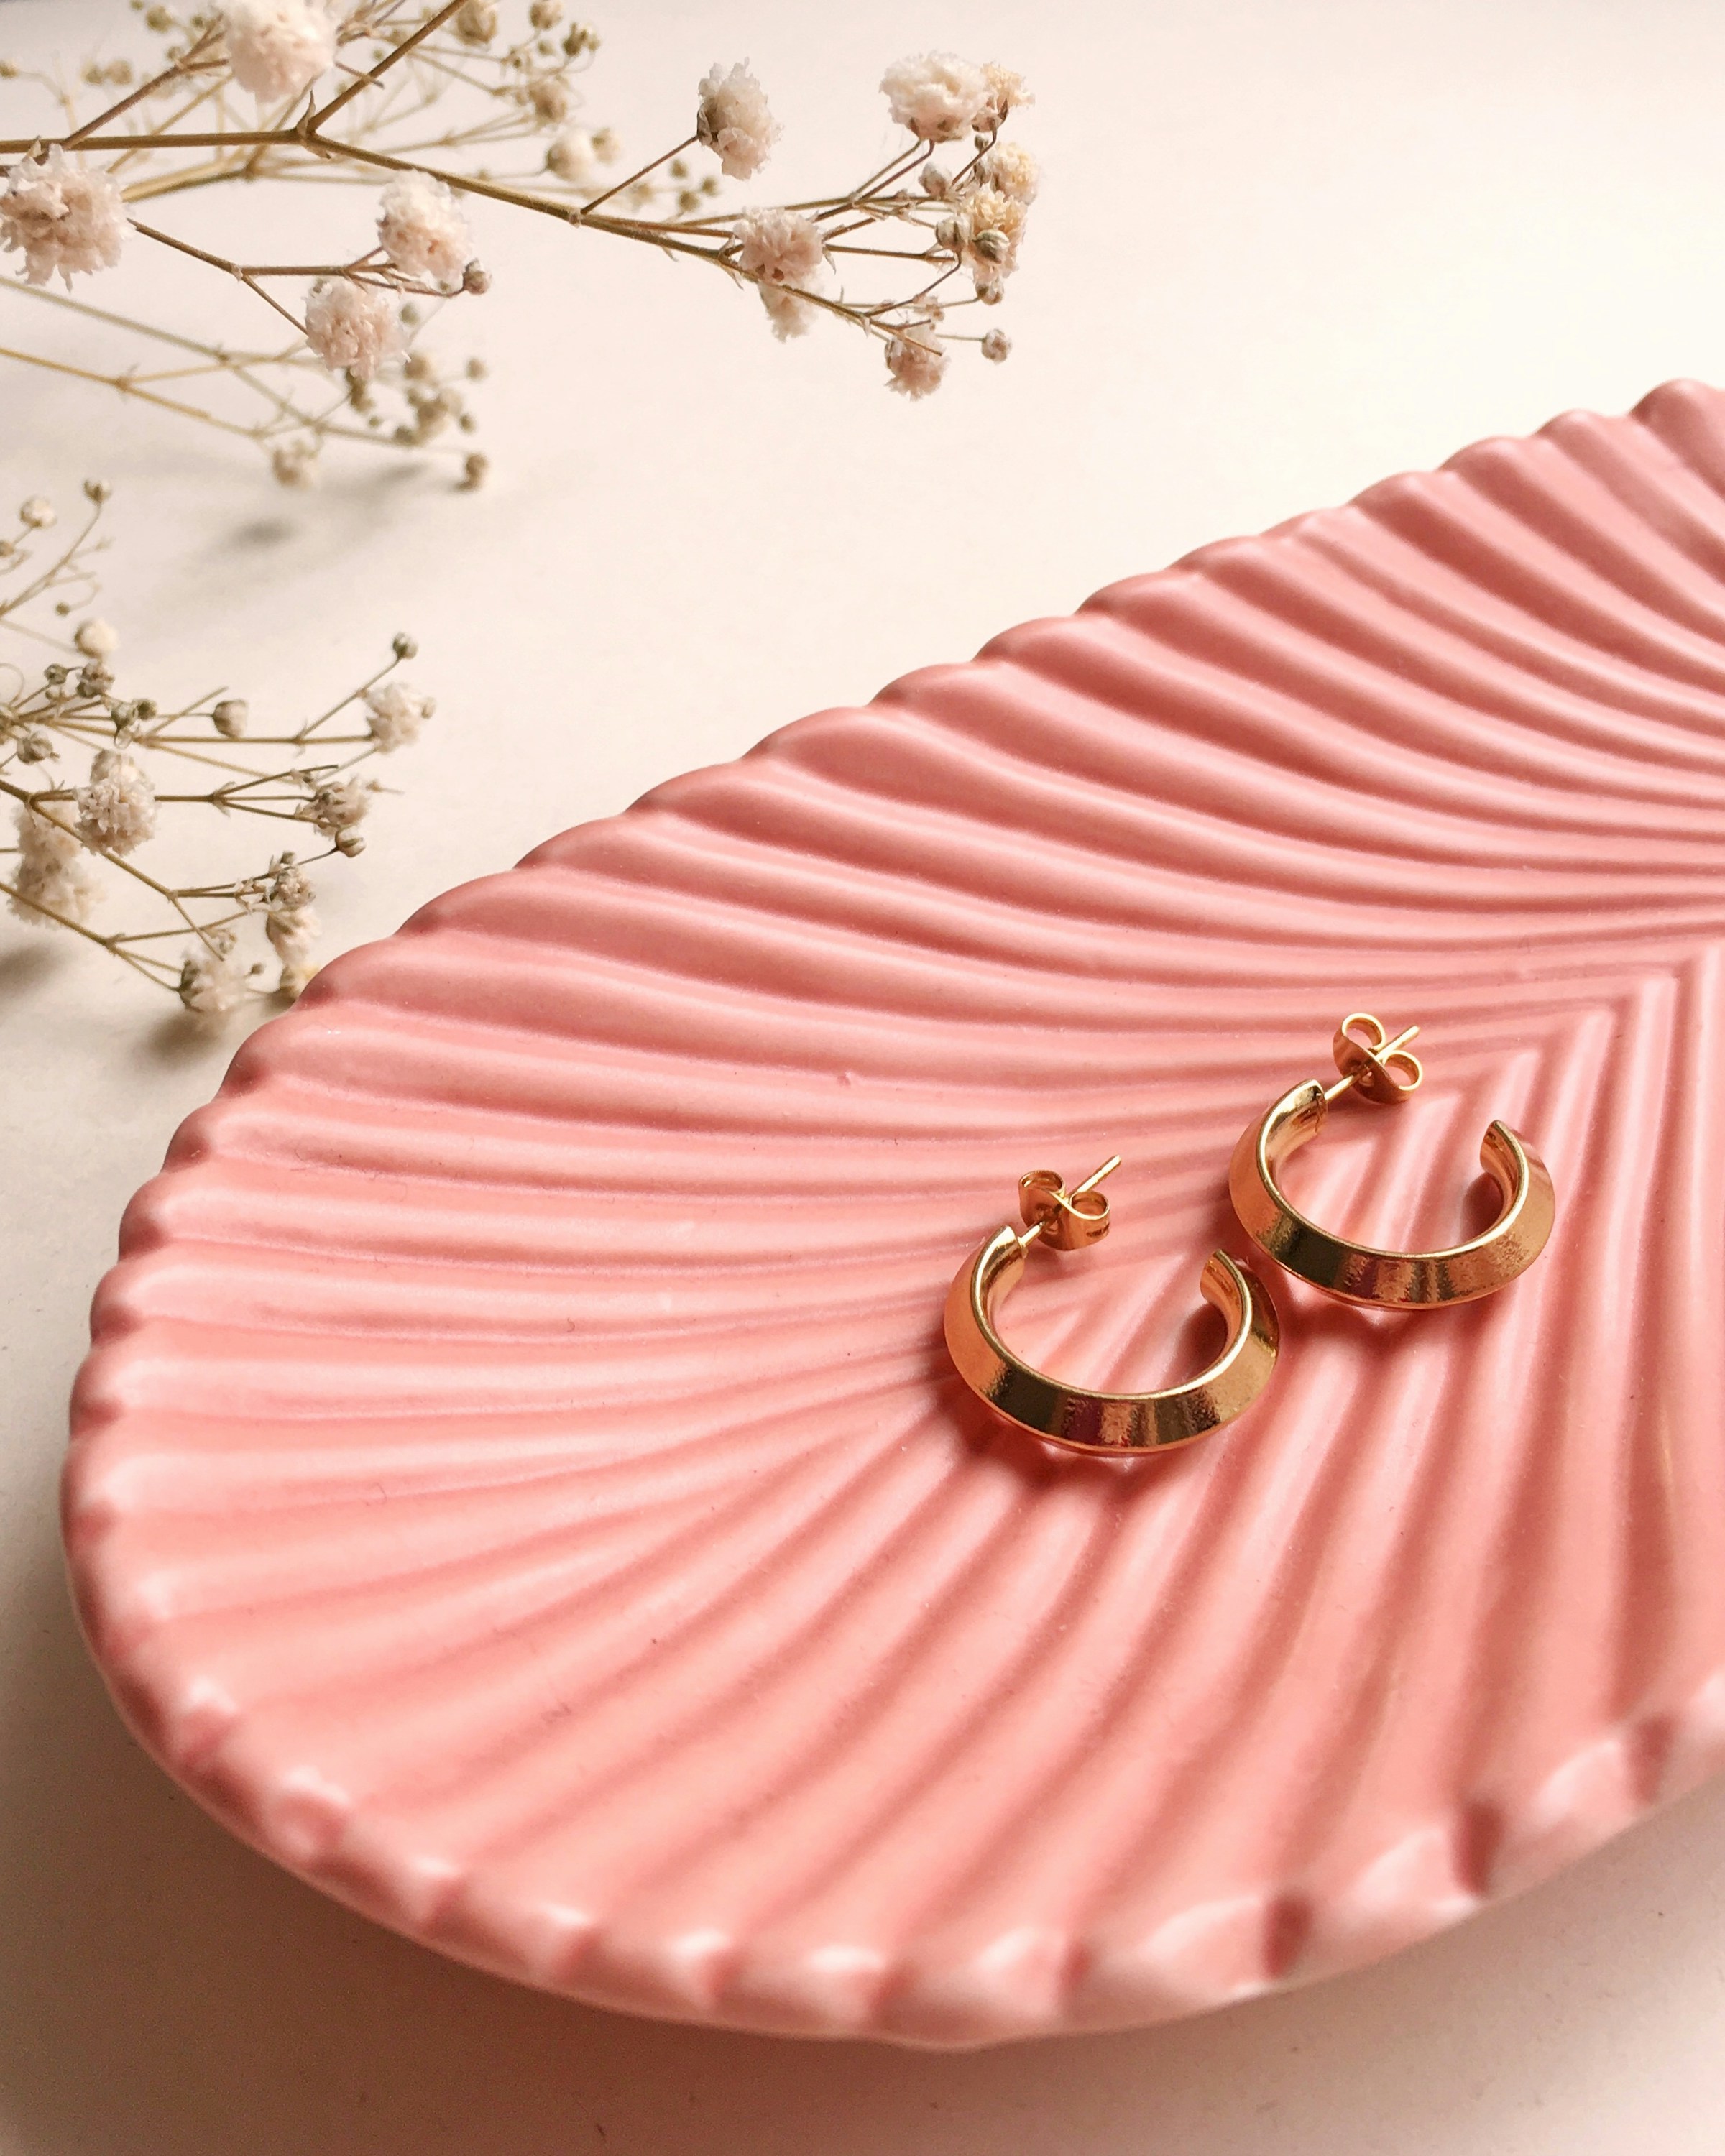 A pair of earrings on a pink tray | Source: Unsplash